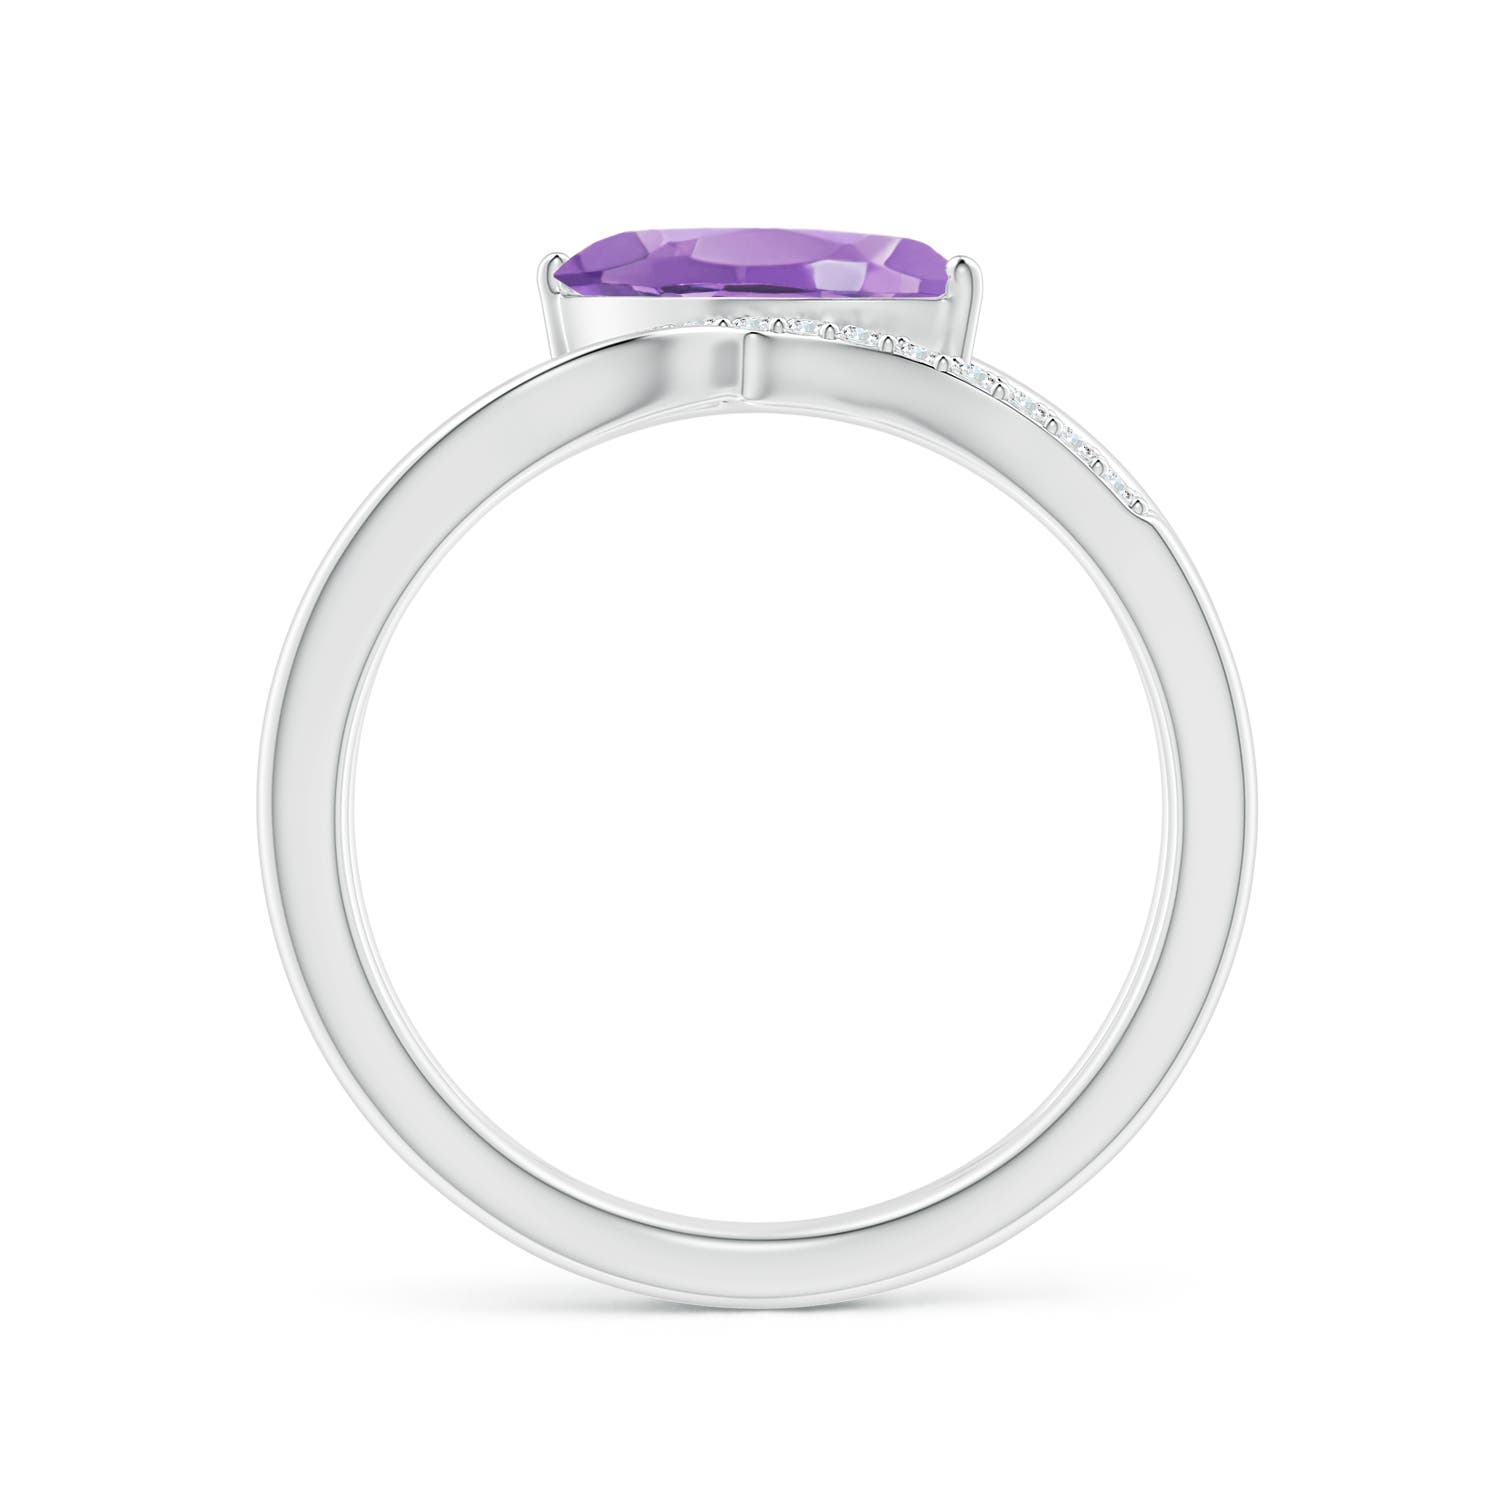 A - Amethyst / 1.13 CT / 14 KT White Gold